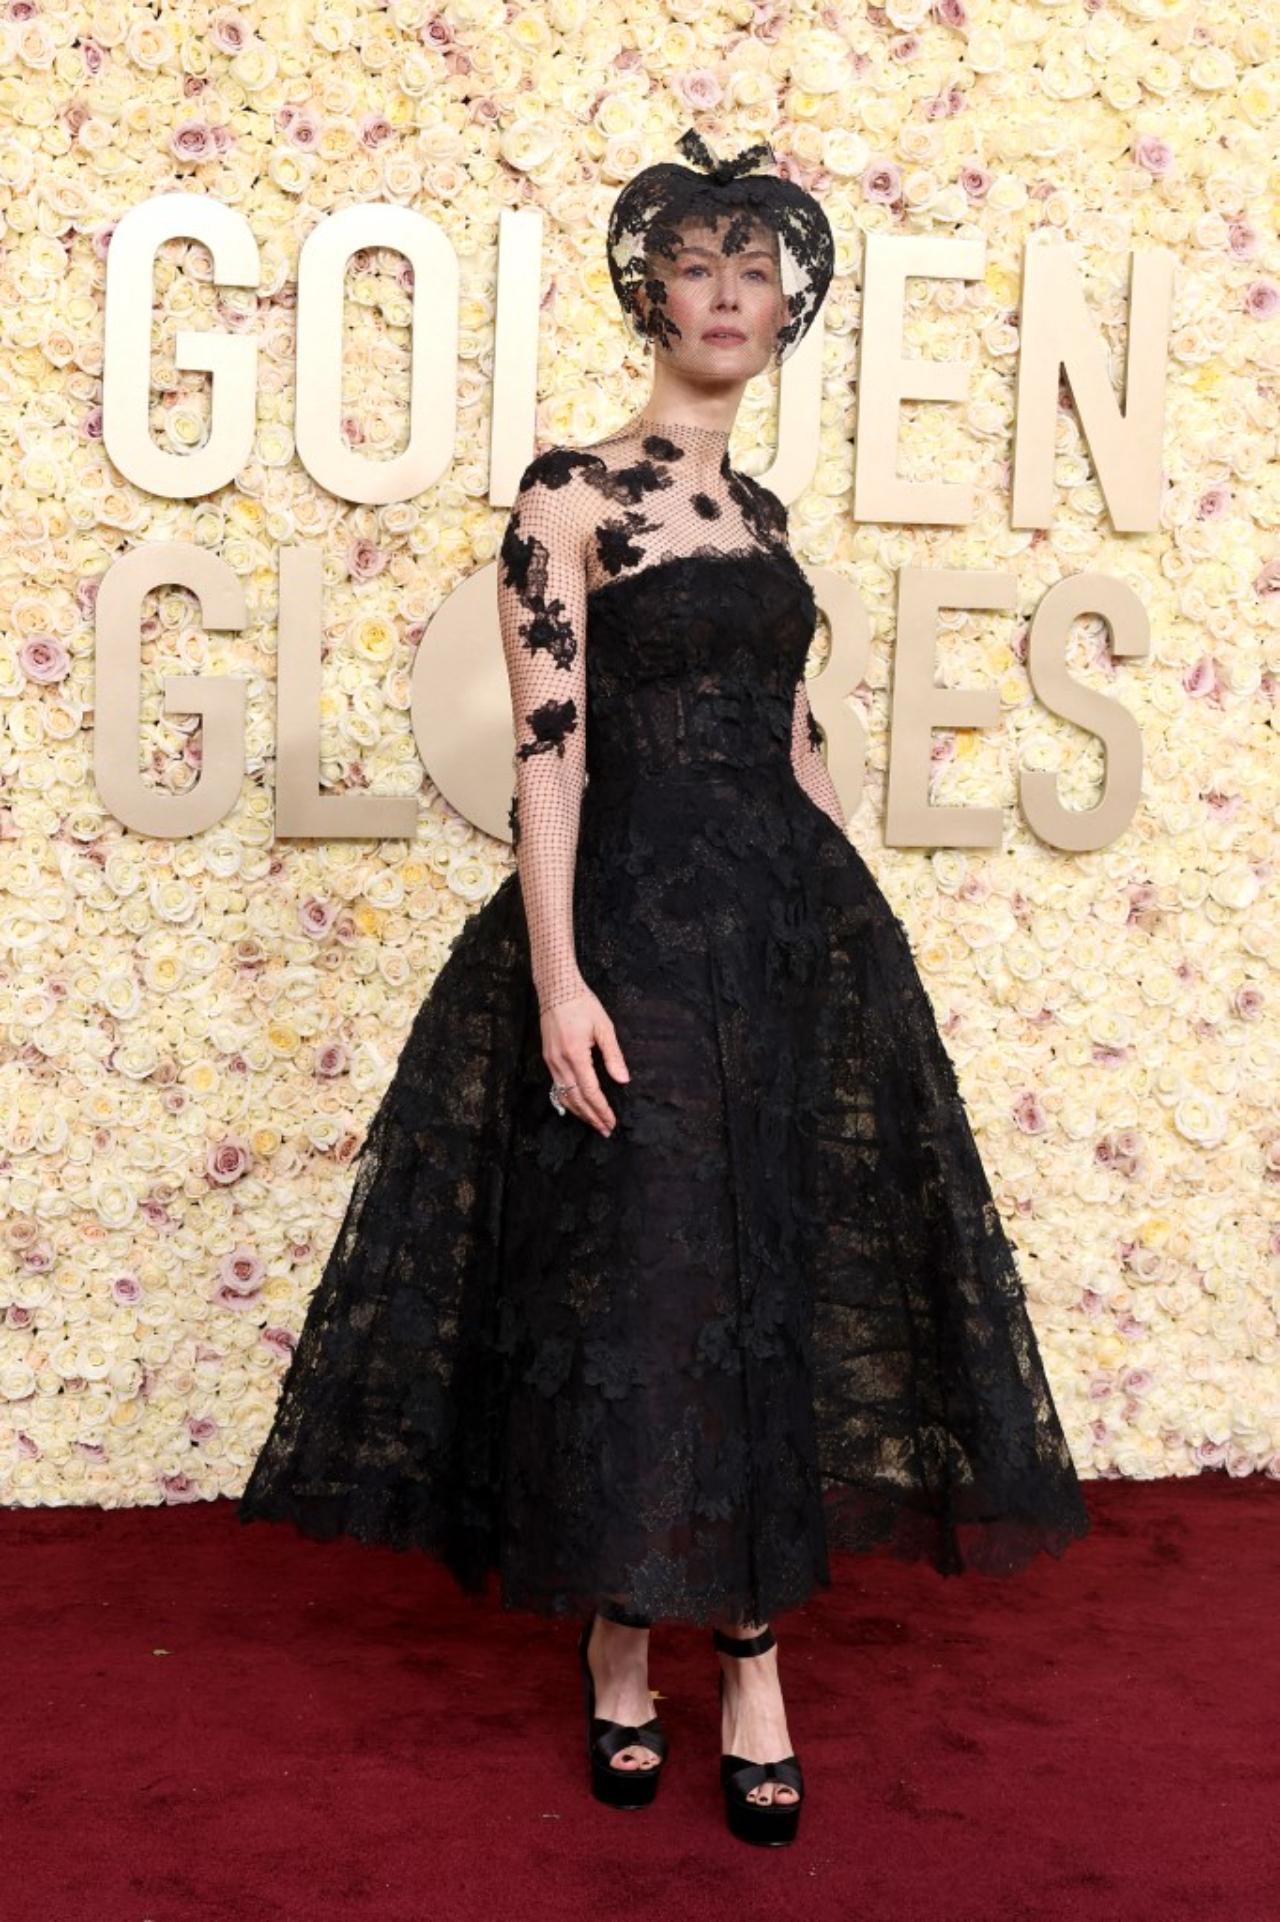 Saltburn actor Rosamund Pike turned her skiing accident that left her 'face smashed' into a fashion win in an eye-catching lace dress and veil at Golden Globes